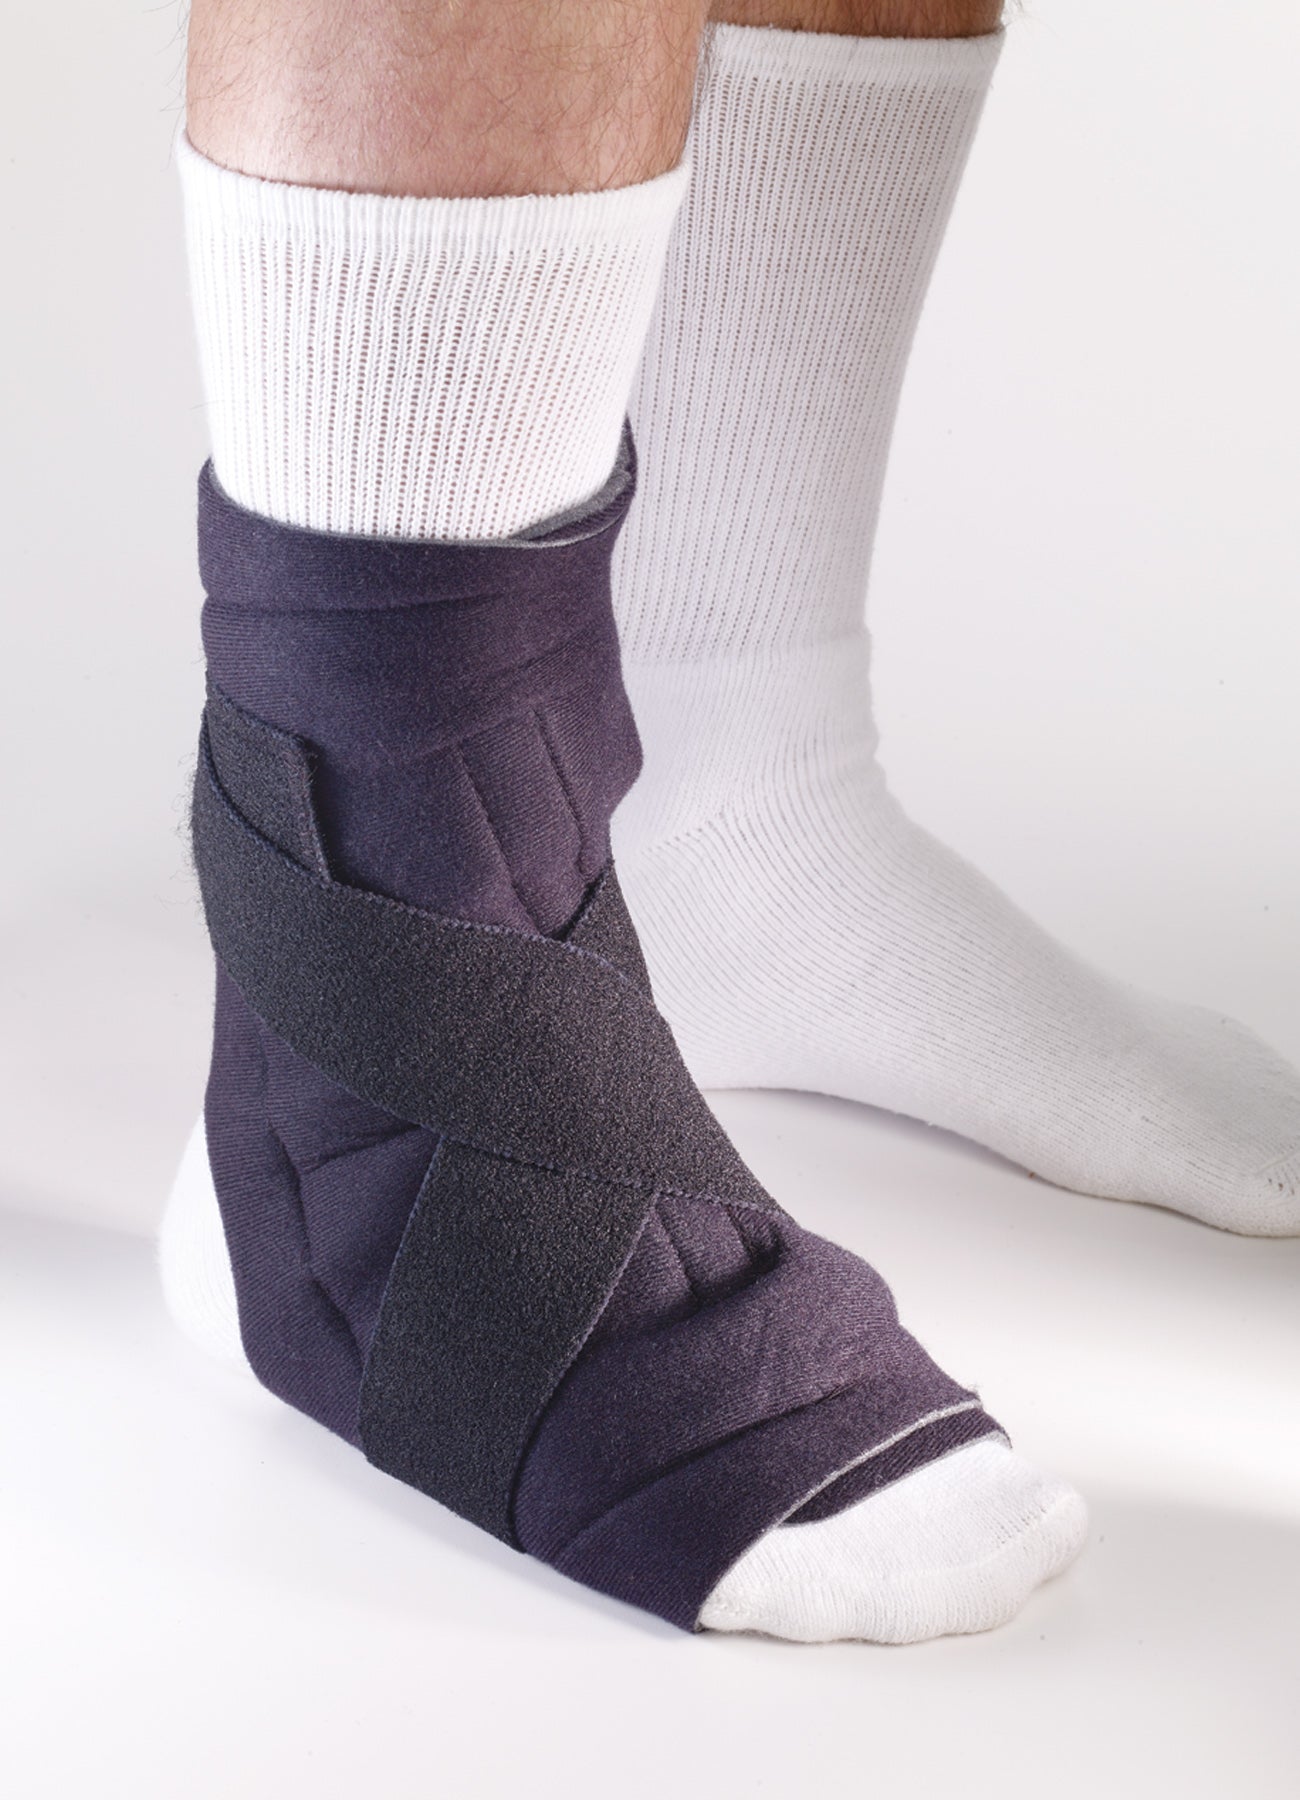 Cryotherm Ankle Wrap with 4 gels